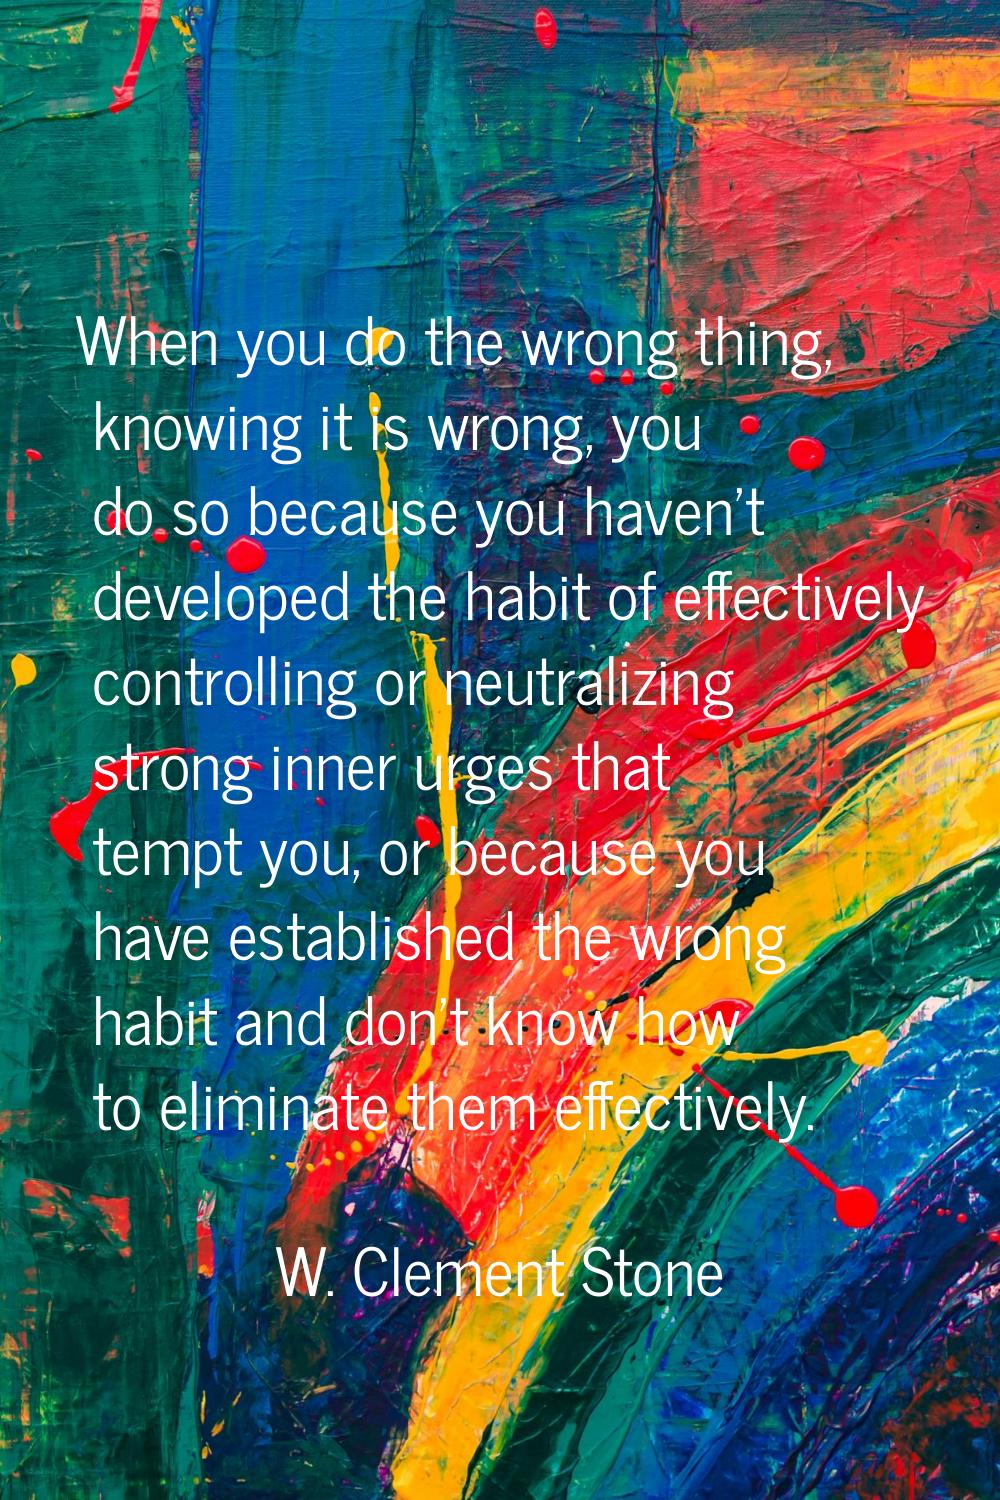 When you do the wrong thing, knowing it is wrong, you do so because you haven't developed the habit